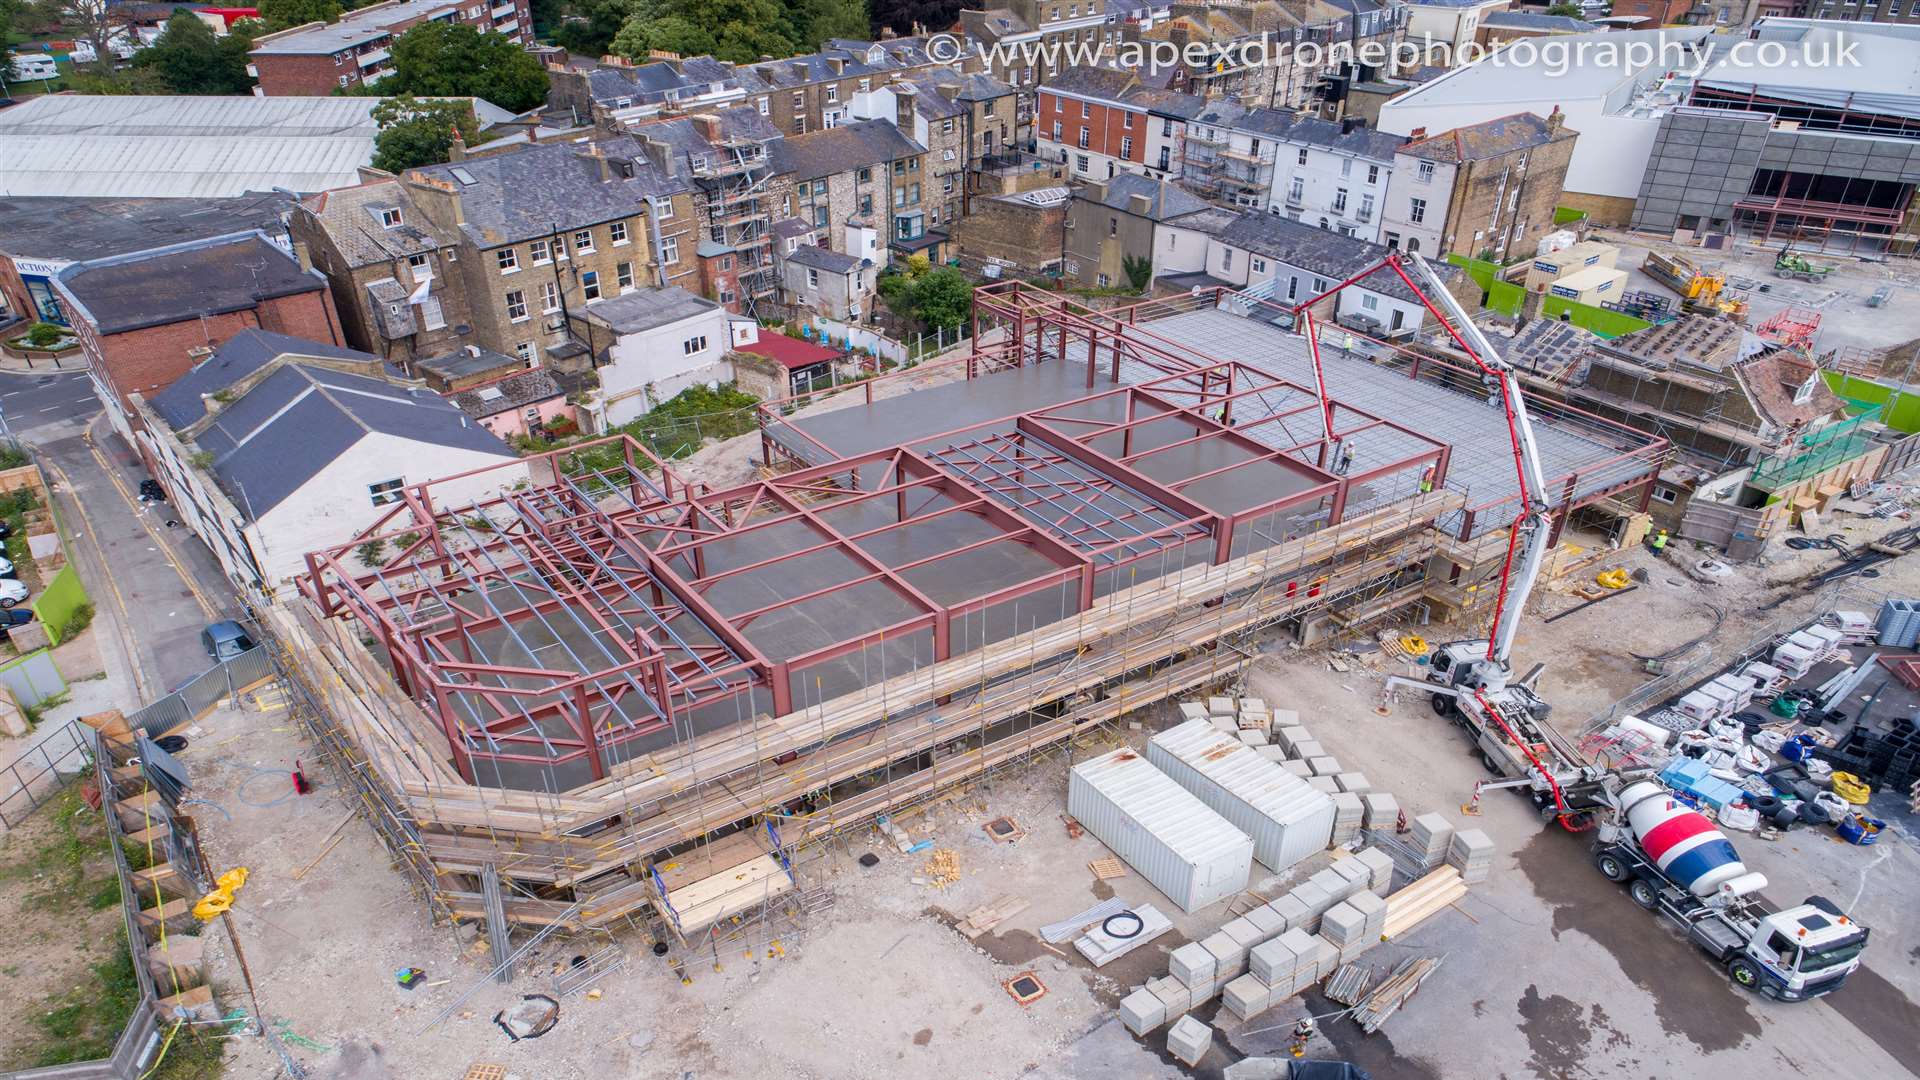 The St James' development last month. Picture courtesy of Apex Drone Photography